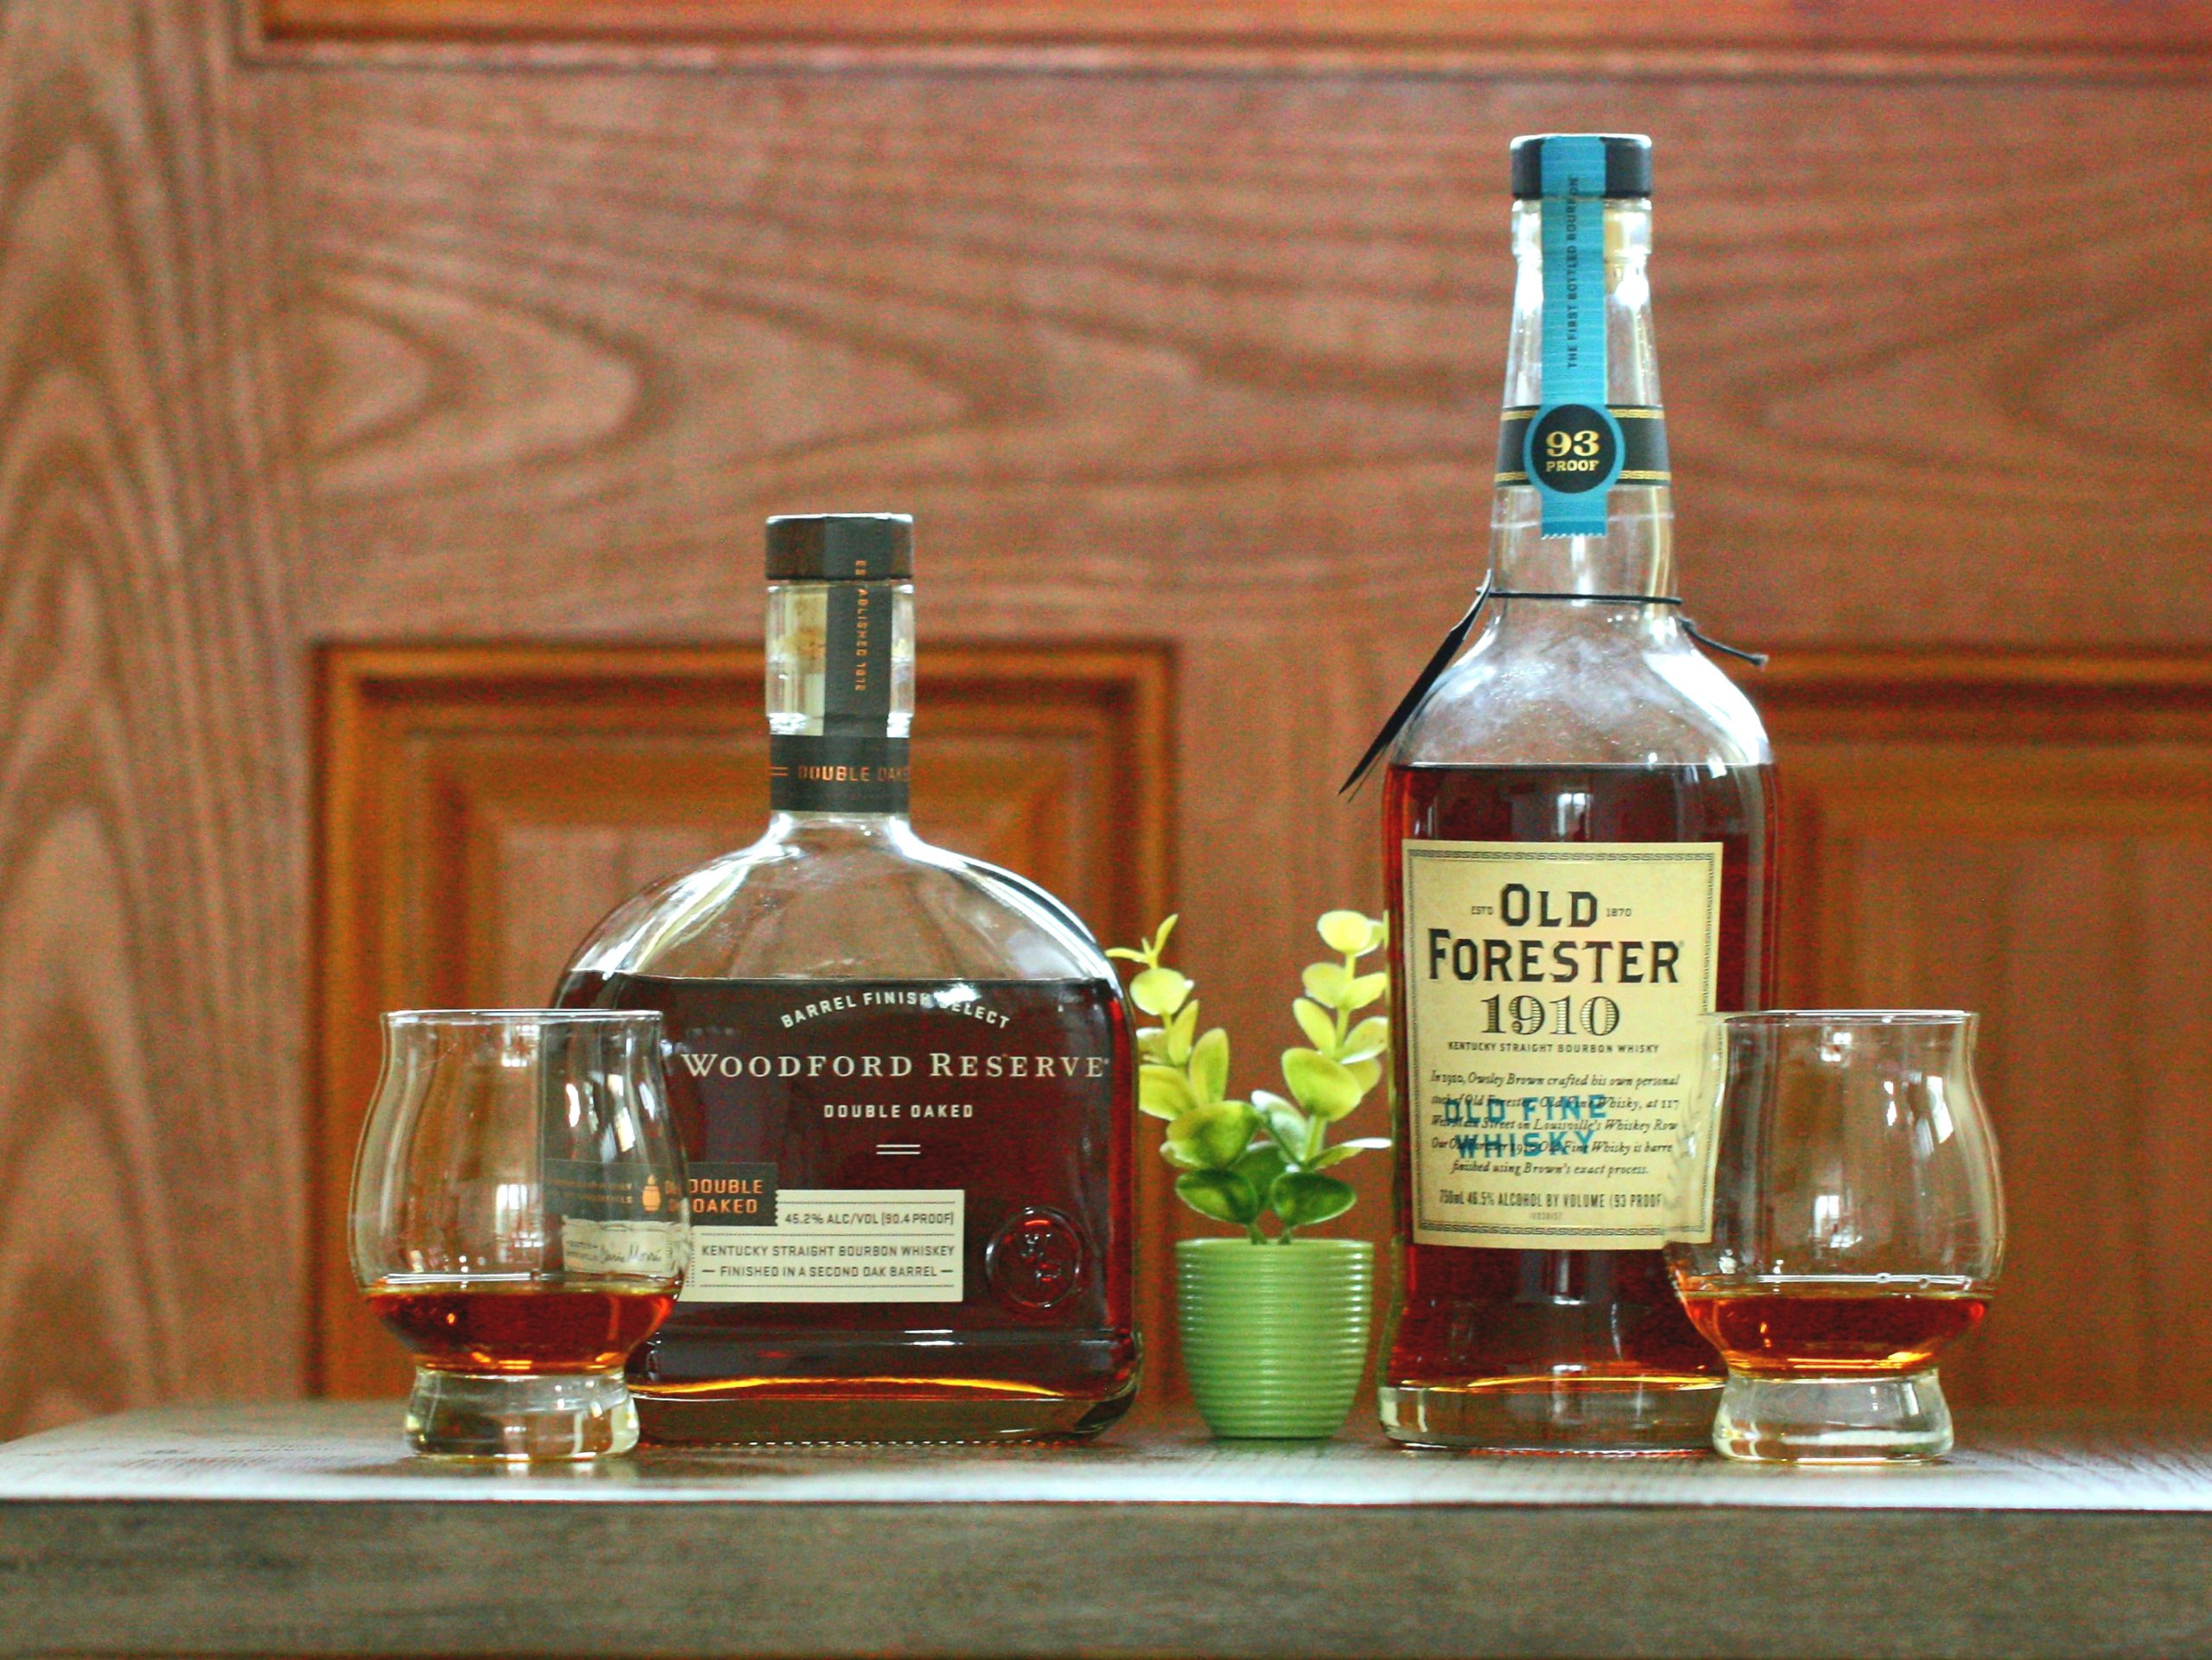 Woodford Reserve Double Oaked Bourbon vs. Old Forester 1910 Old Fine Whisky Review